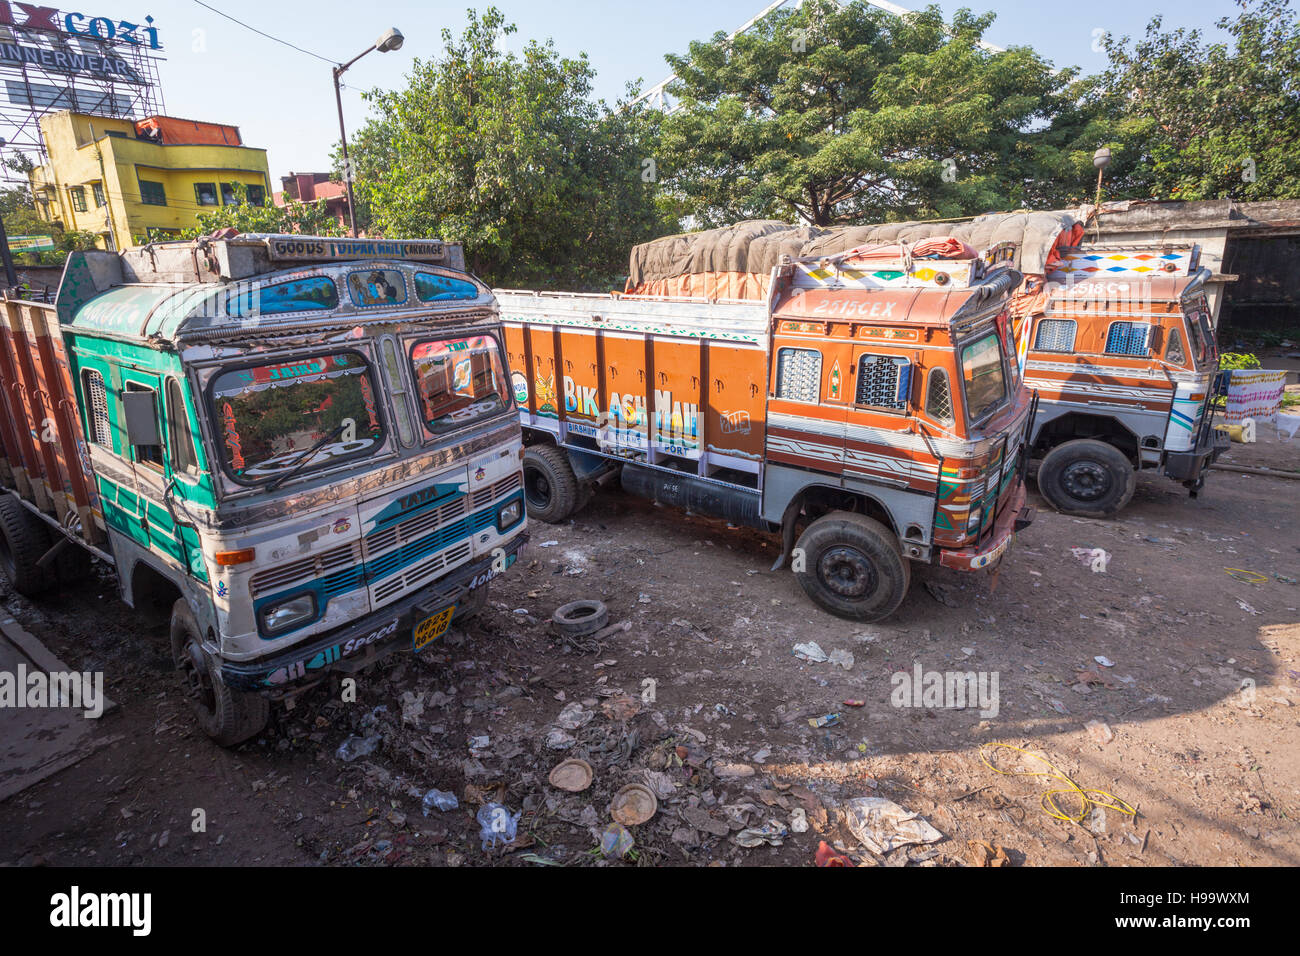 Traditional painted lorries or trucks parked by the flower market, Kolkata (Calcutta), India Stock Photo